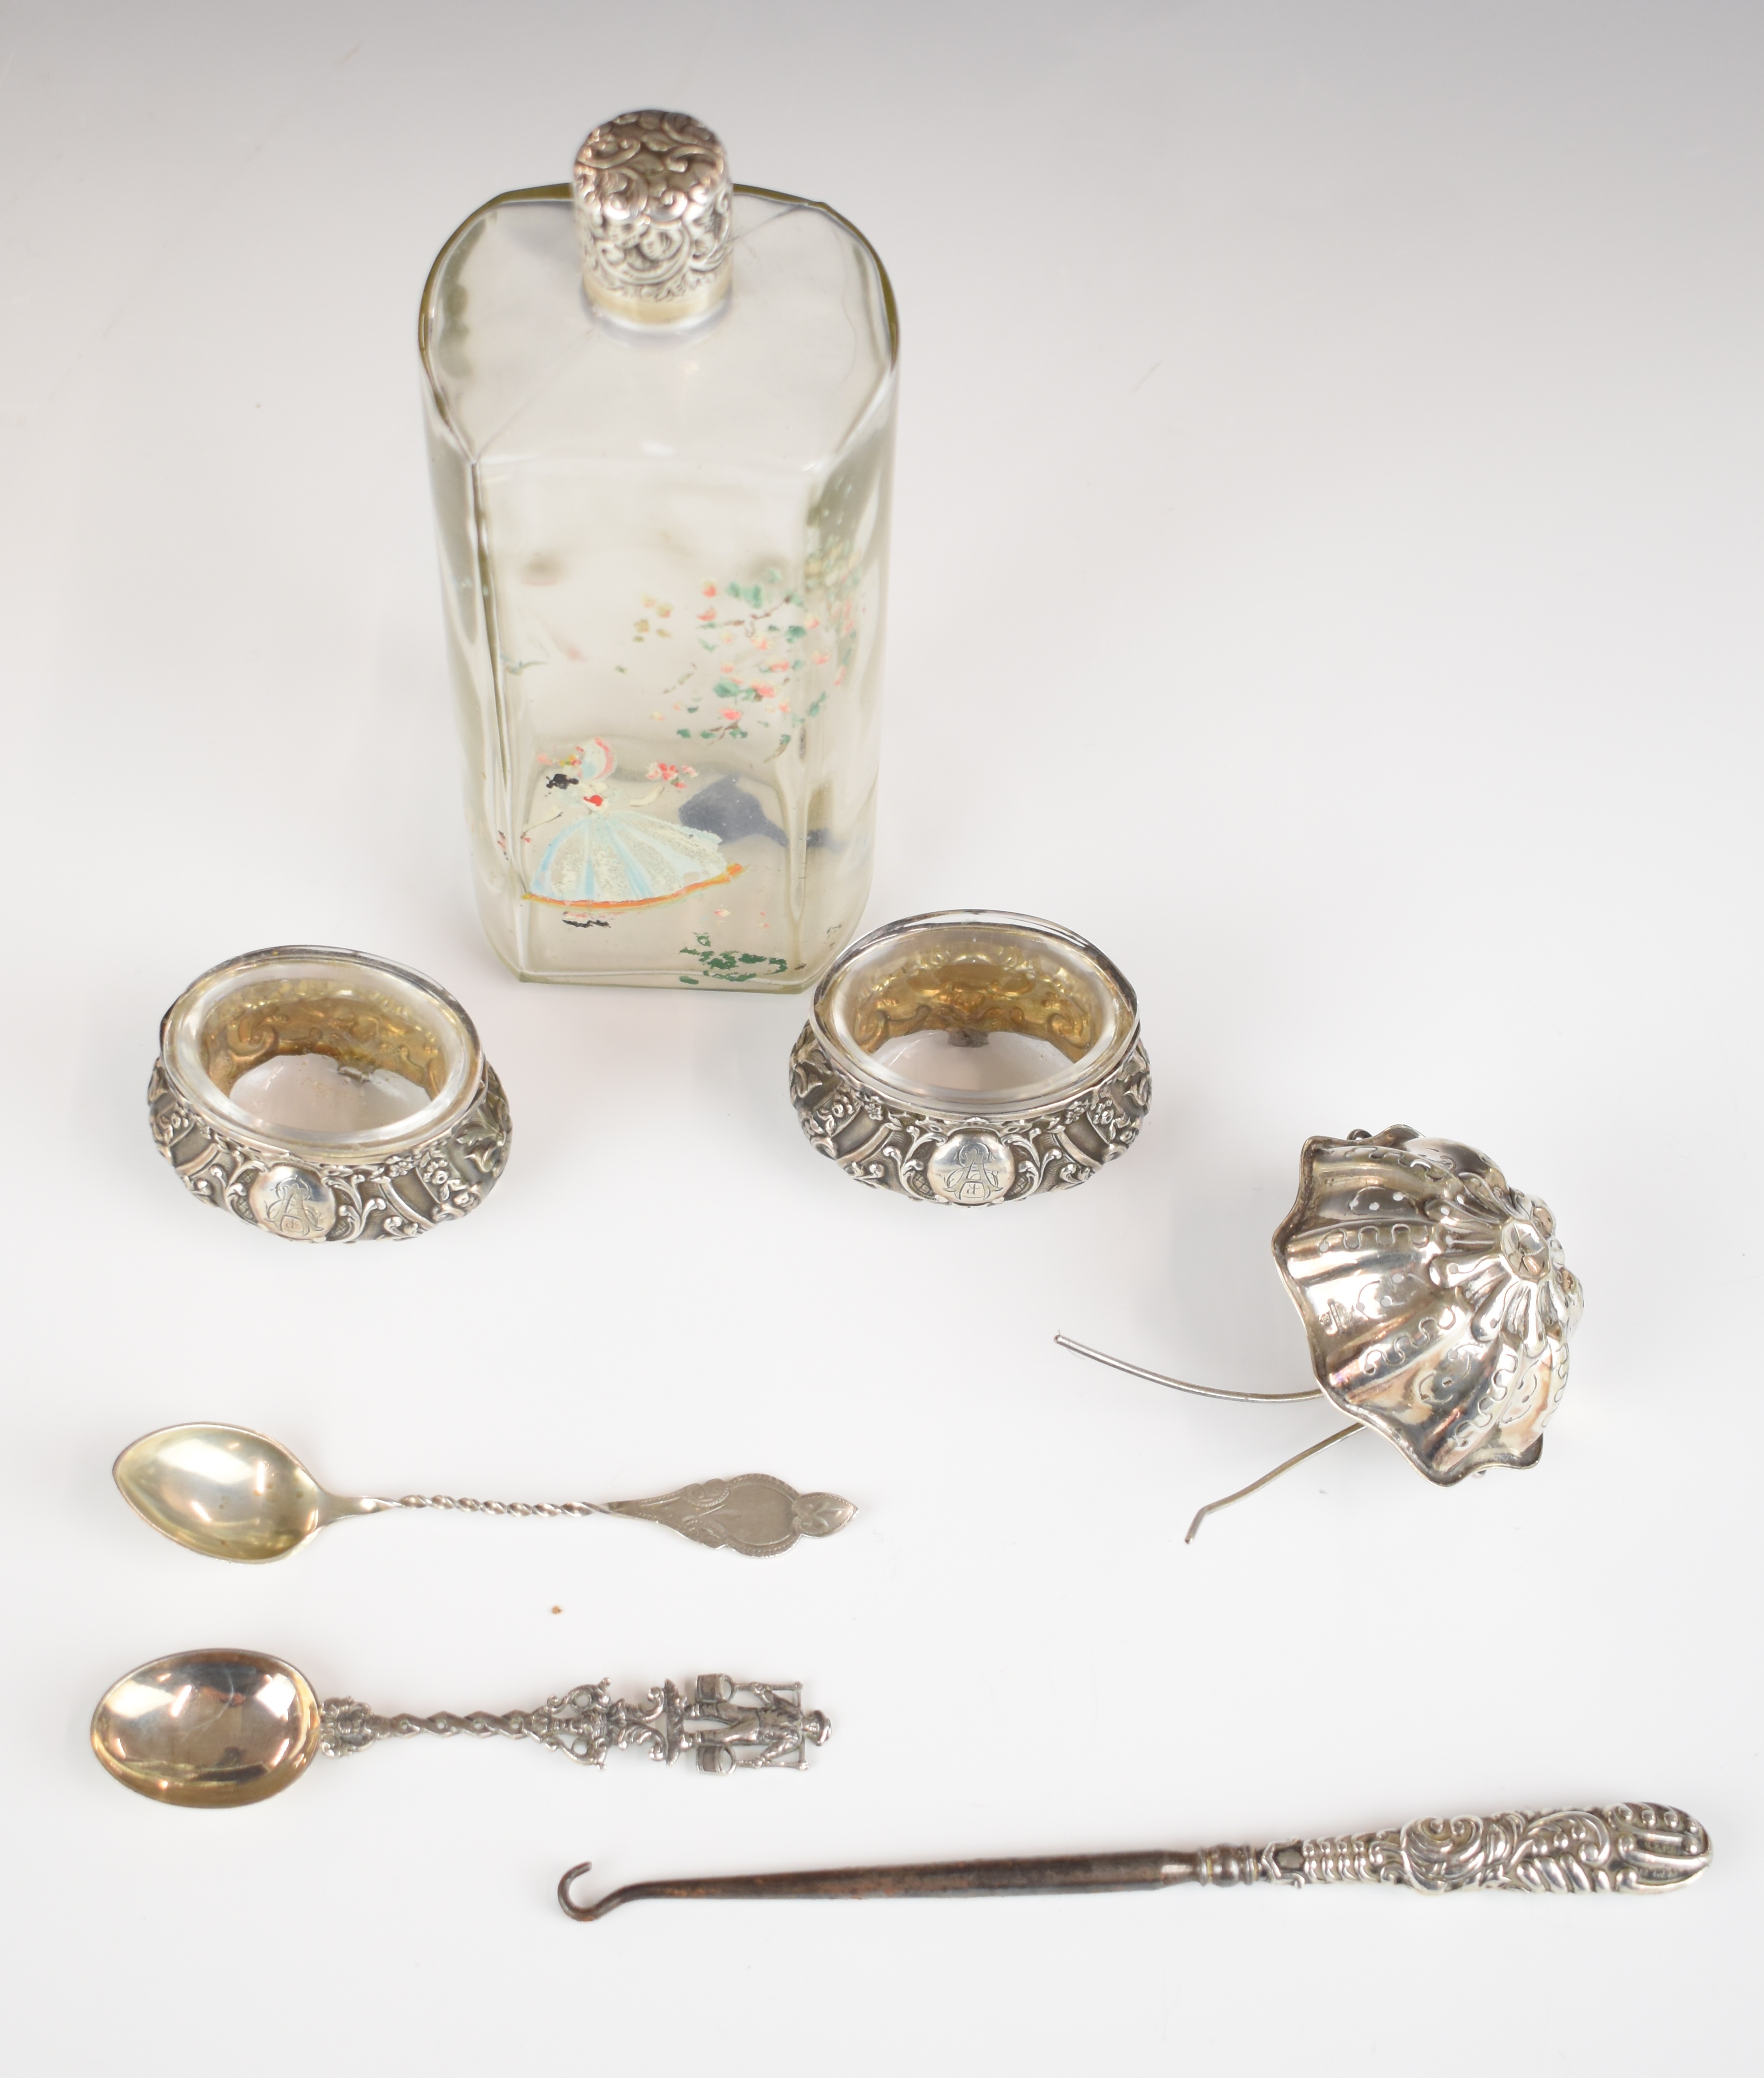 Pair of continental silver salts with clear glass liners, teaspoon marked sterling, further